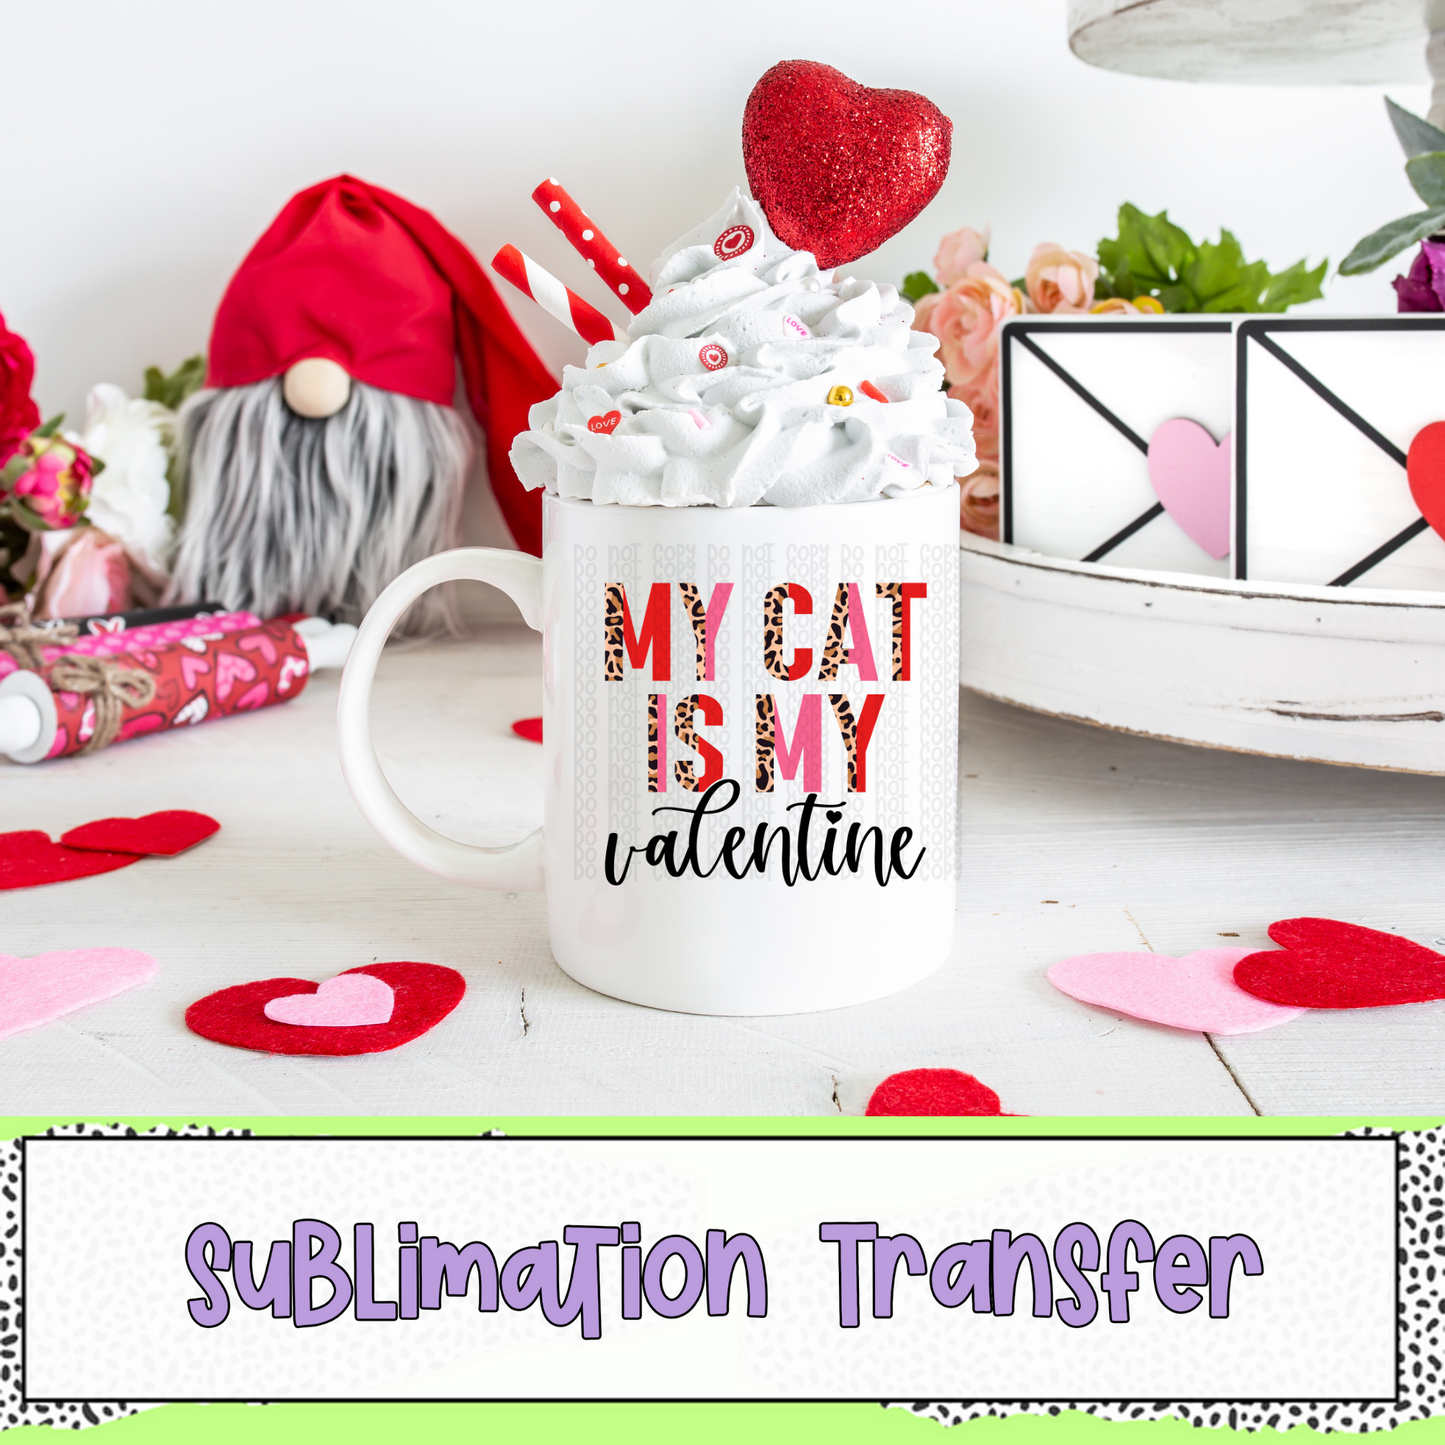 My Cat is my Valentine - SUBLIMATION TRANSFER